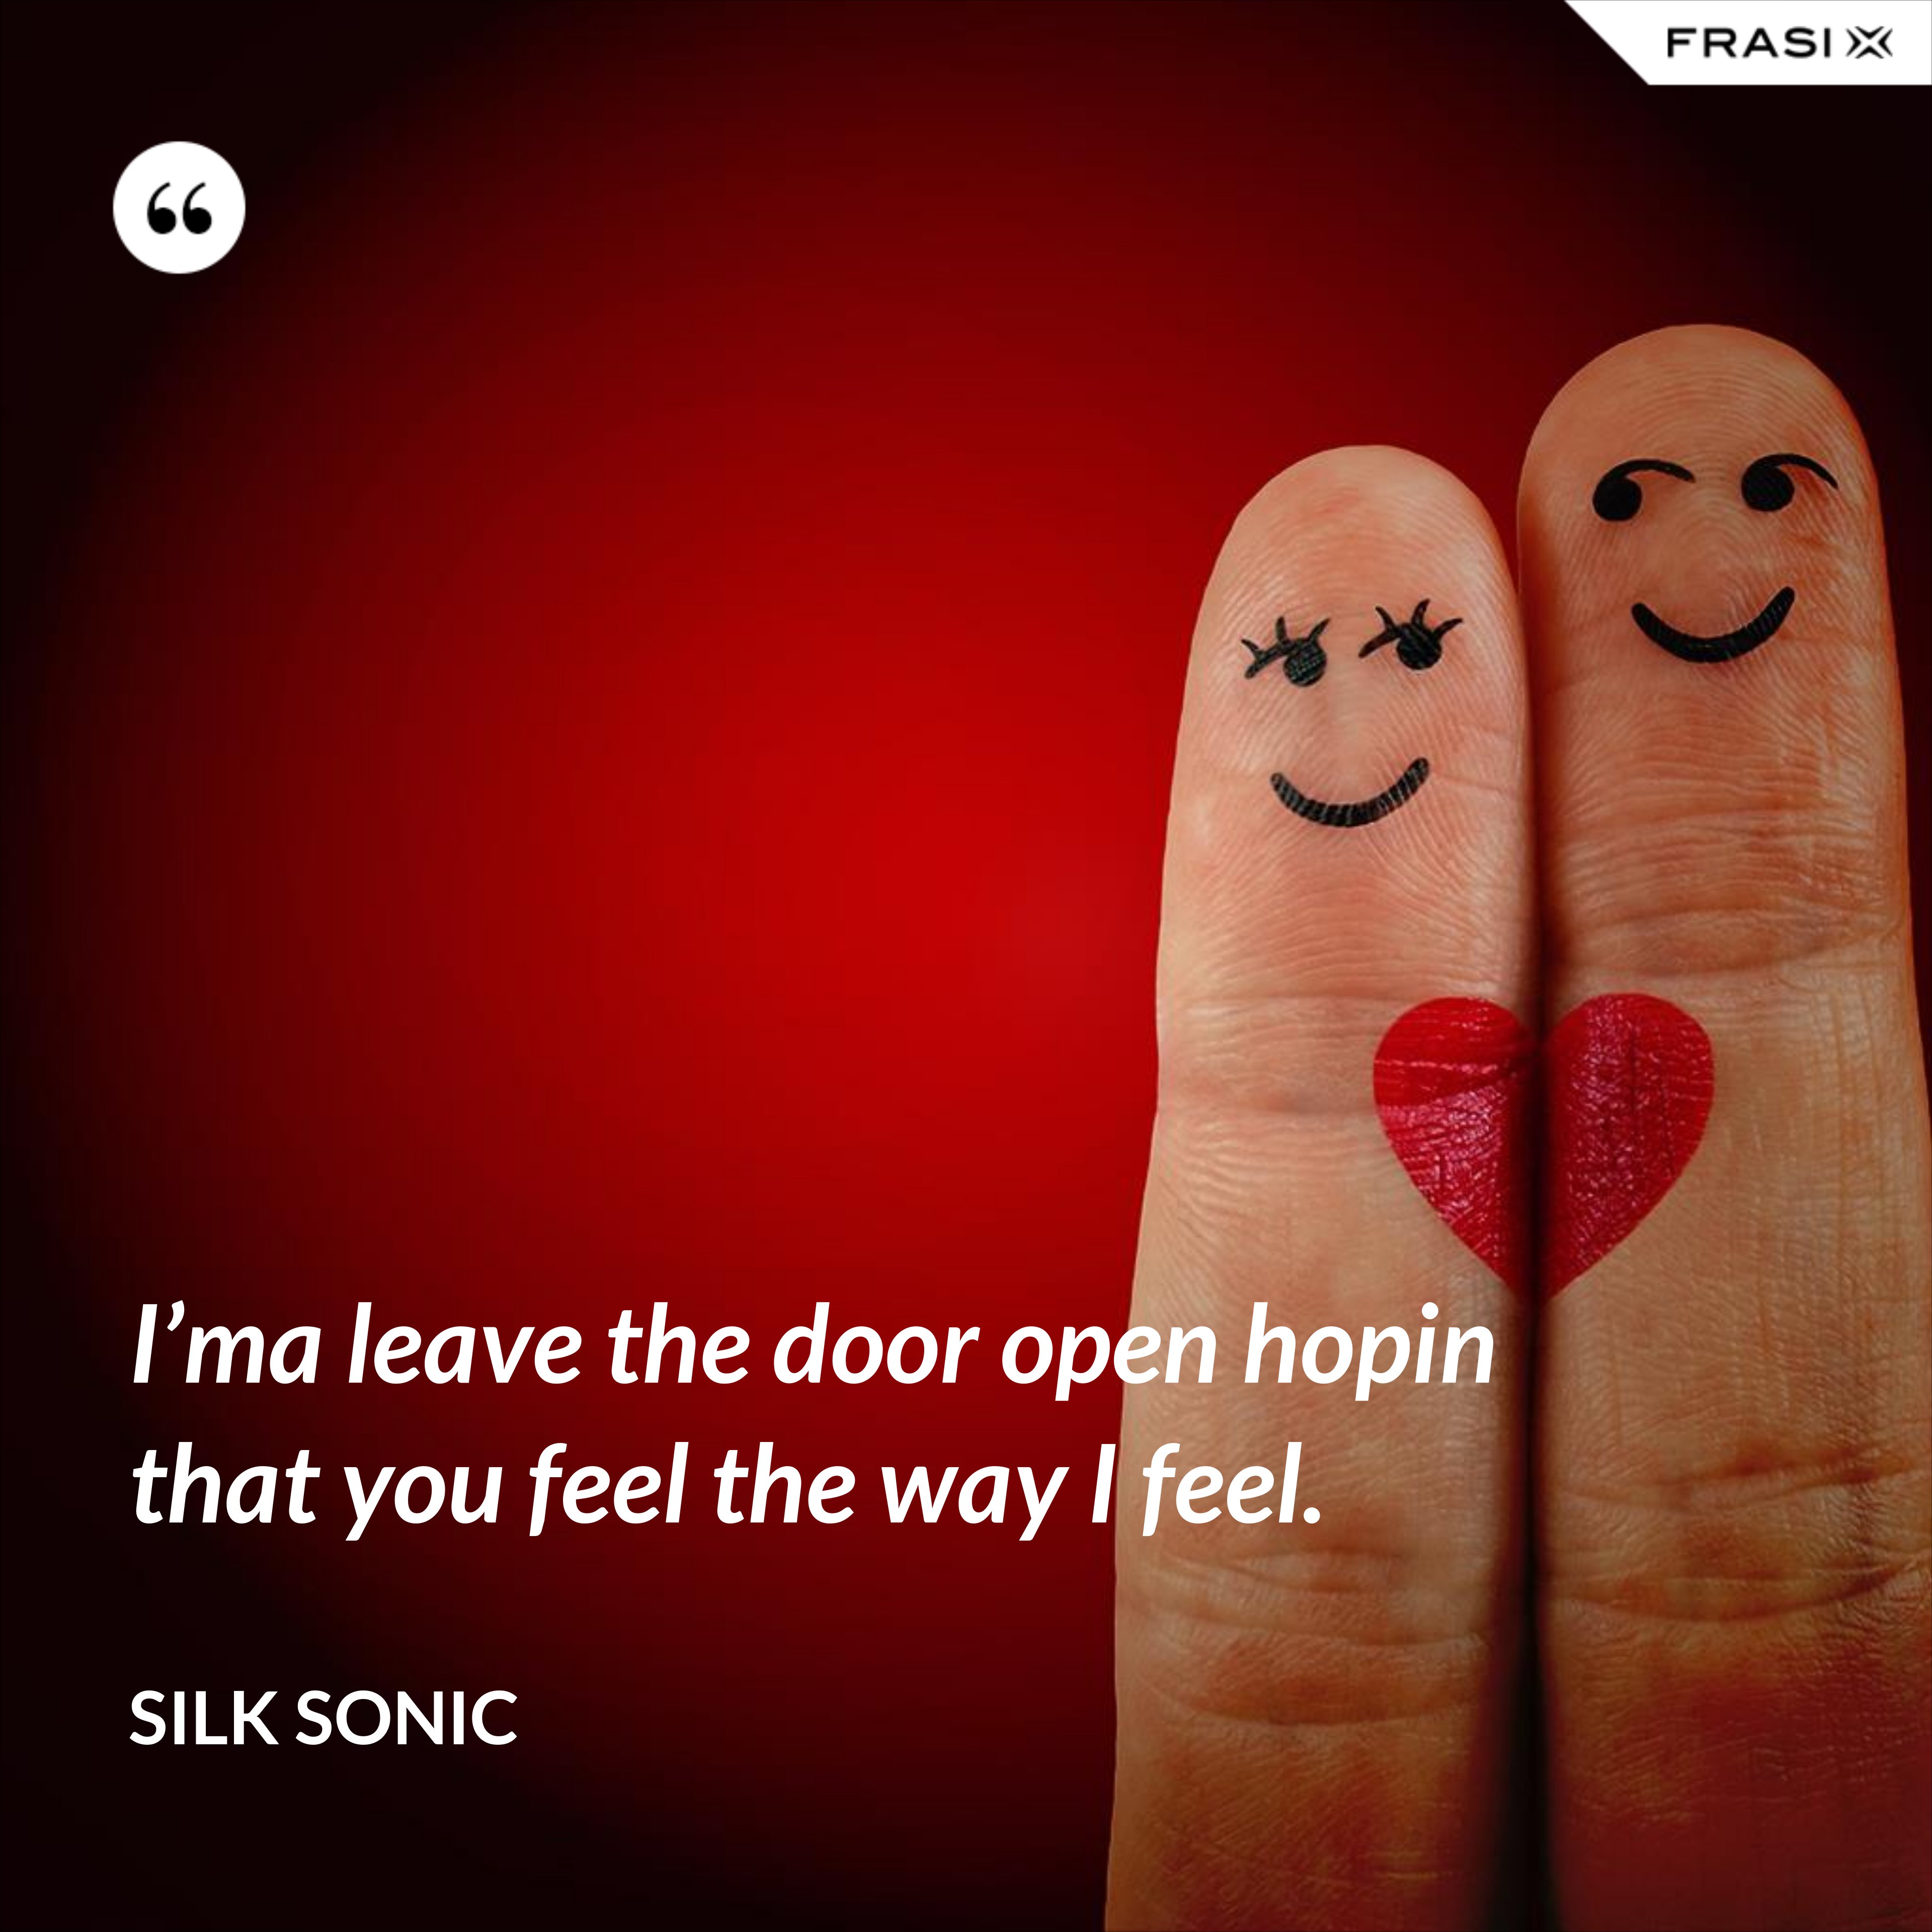 I’ma leave the door open hopin that you feel the way I feel. - Silk Sonic